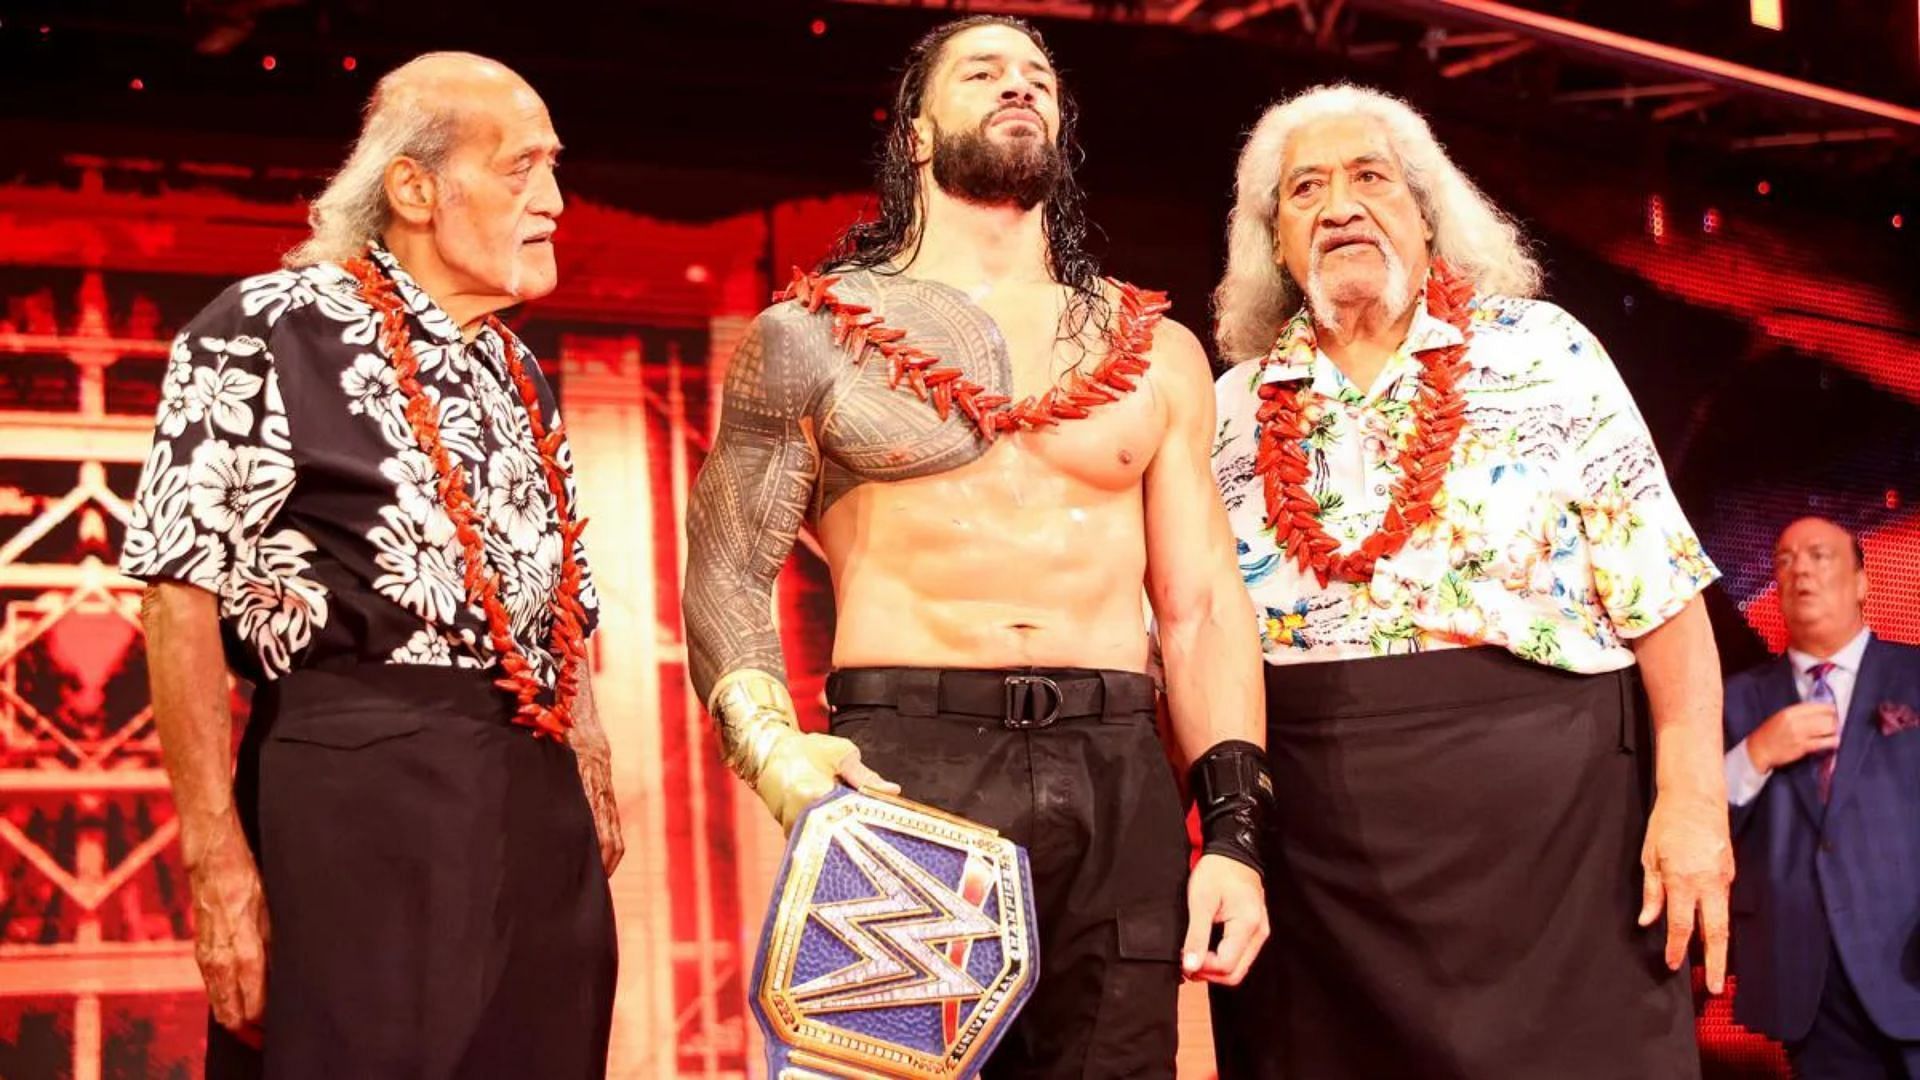 Roman Reigns, The Wild Samoans and Paul Heyman at WWE Hell in a Cell 2020